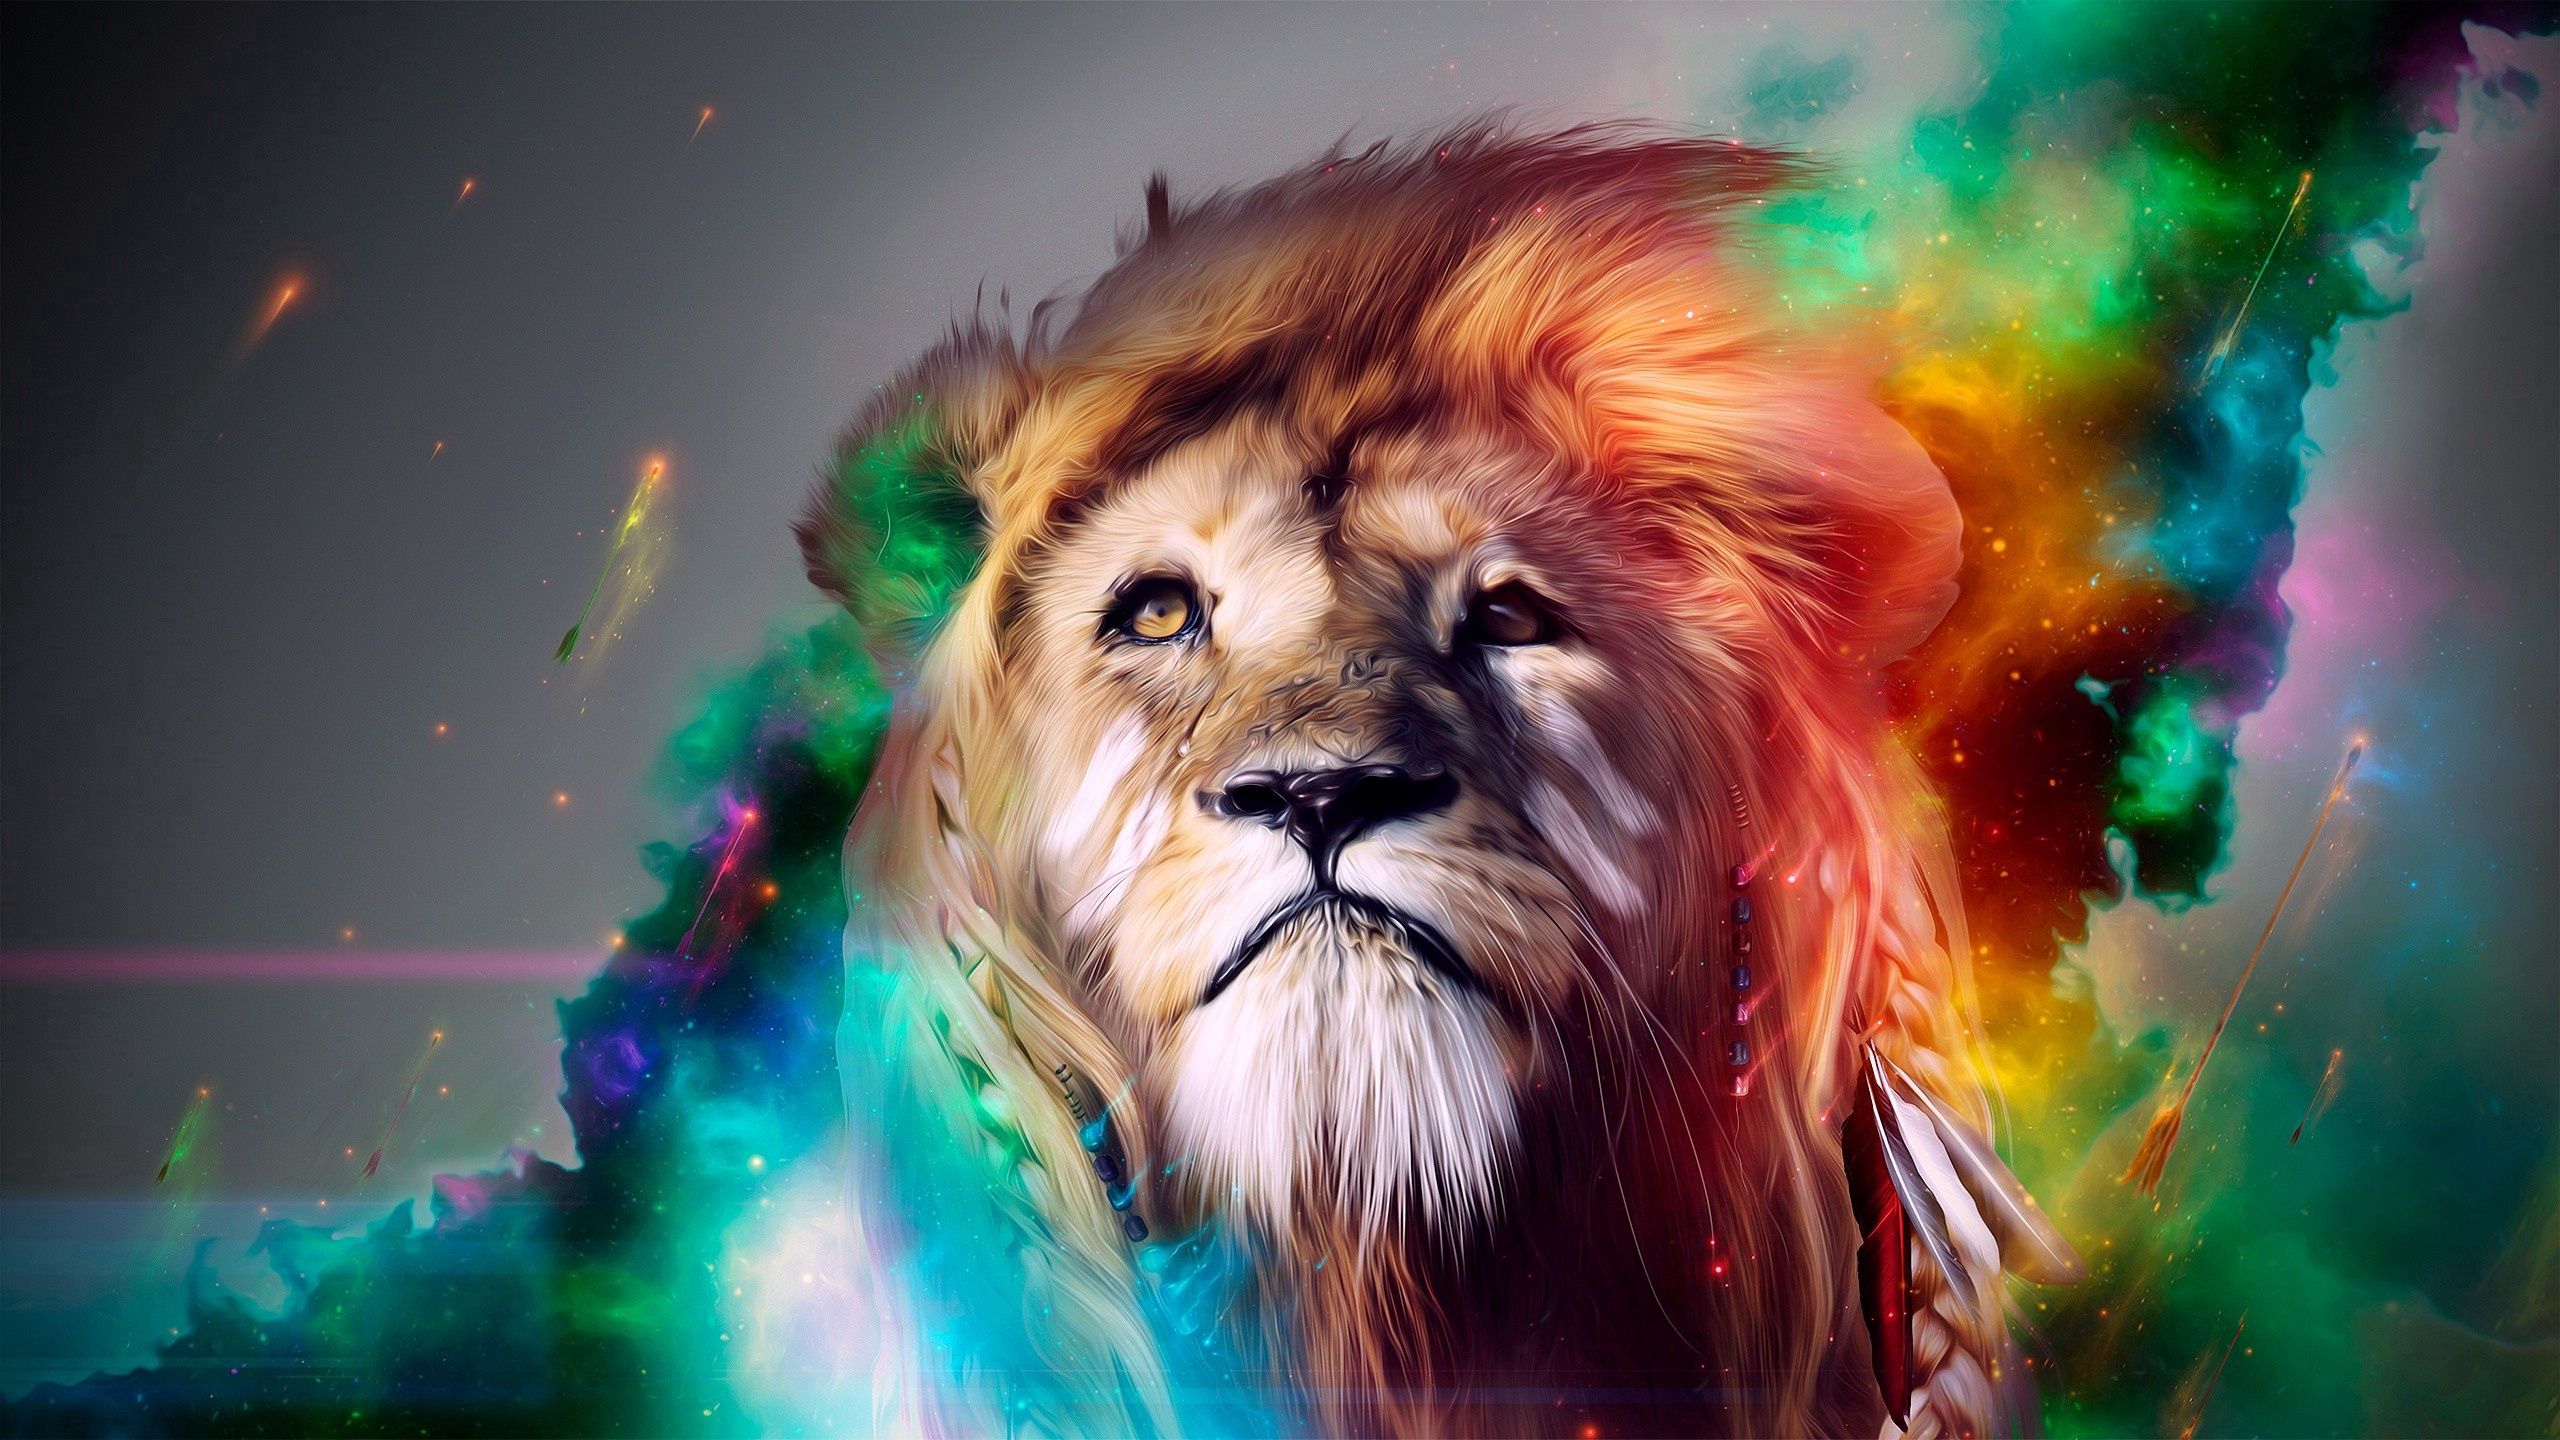 lion, motley, smoke, muzzle, abstract, multicolored, big cat lock screen backgrounds